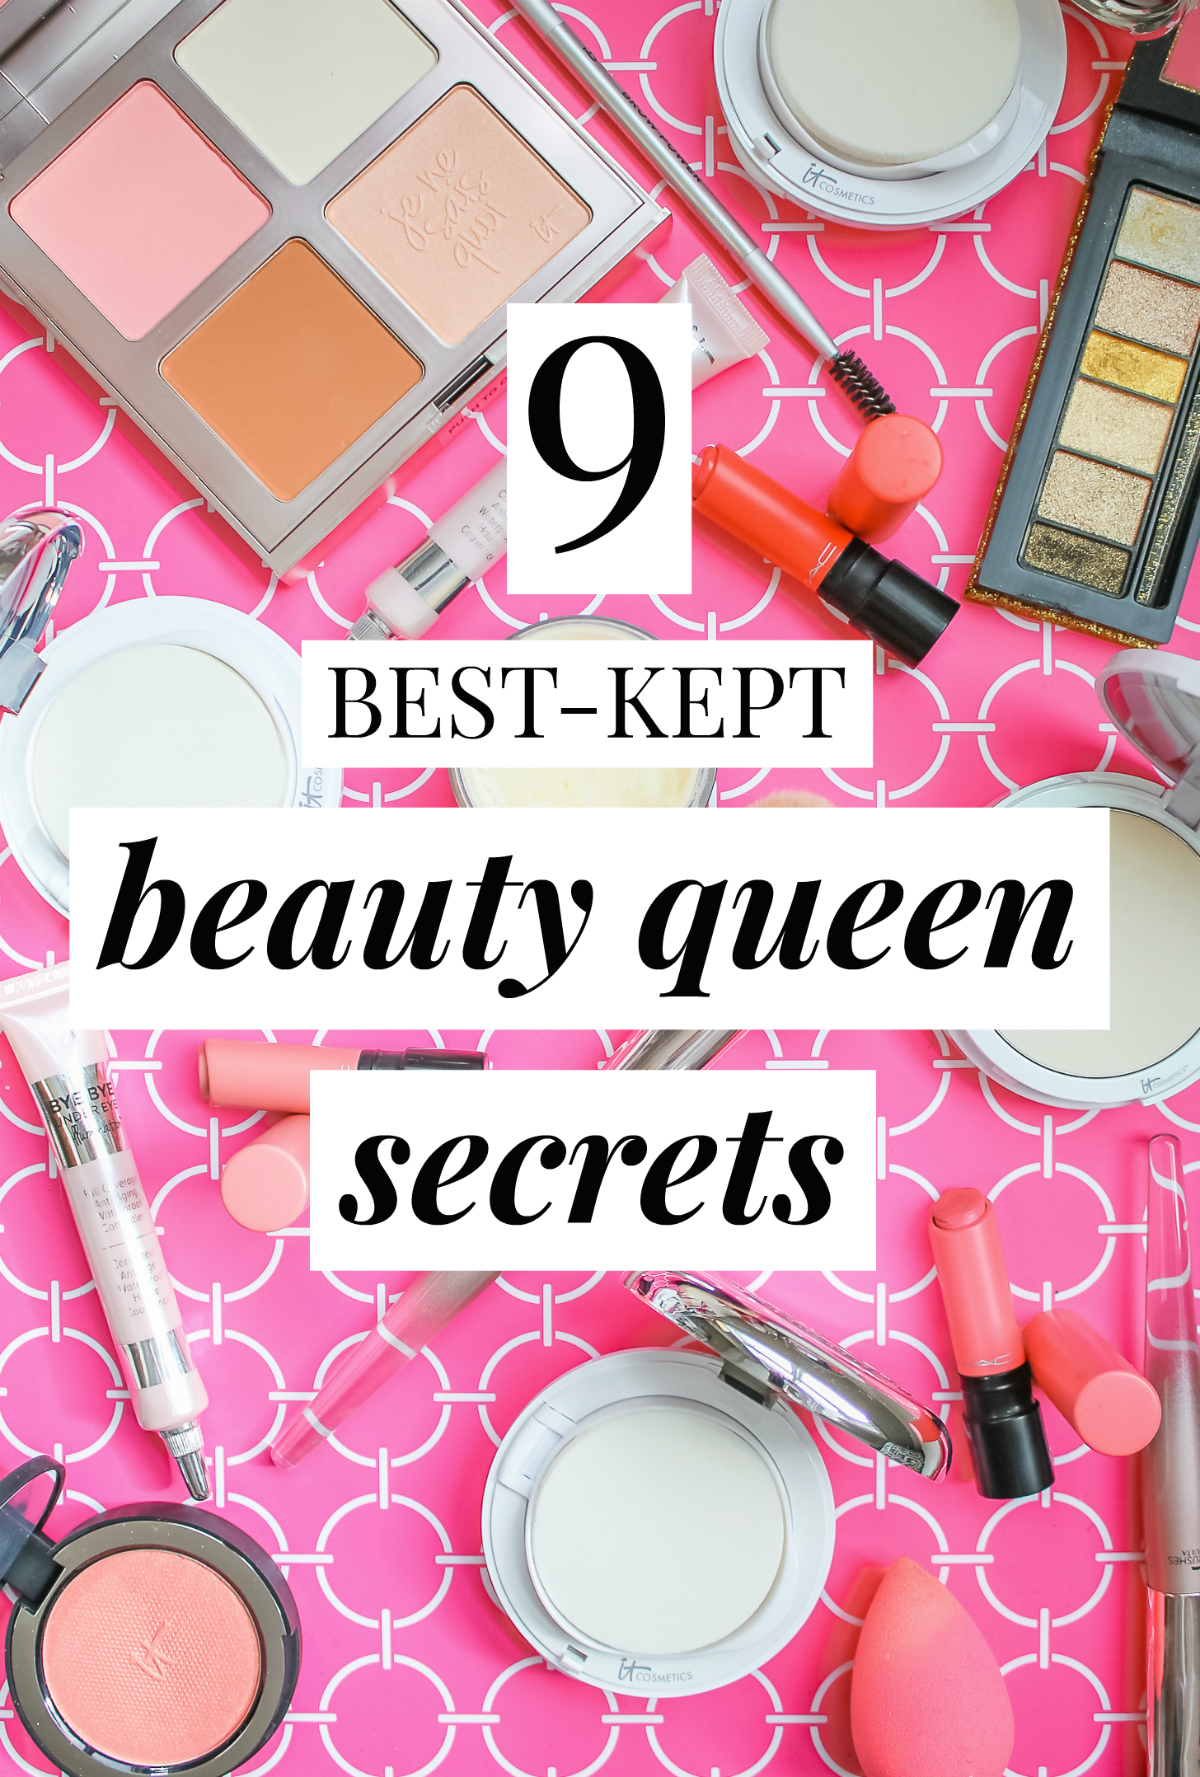 9 best kept beauty queen secrets by beauty blogger and retired pageant queen Stephanie Ziajka from Diary of a Debutante